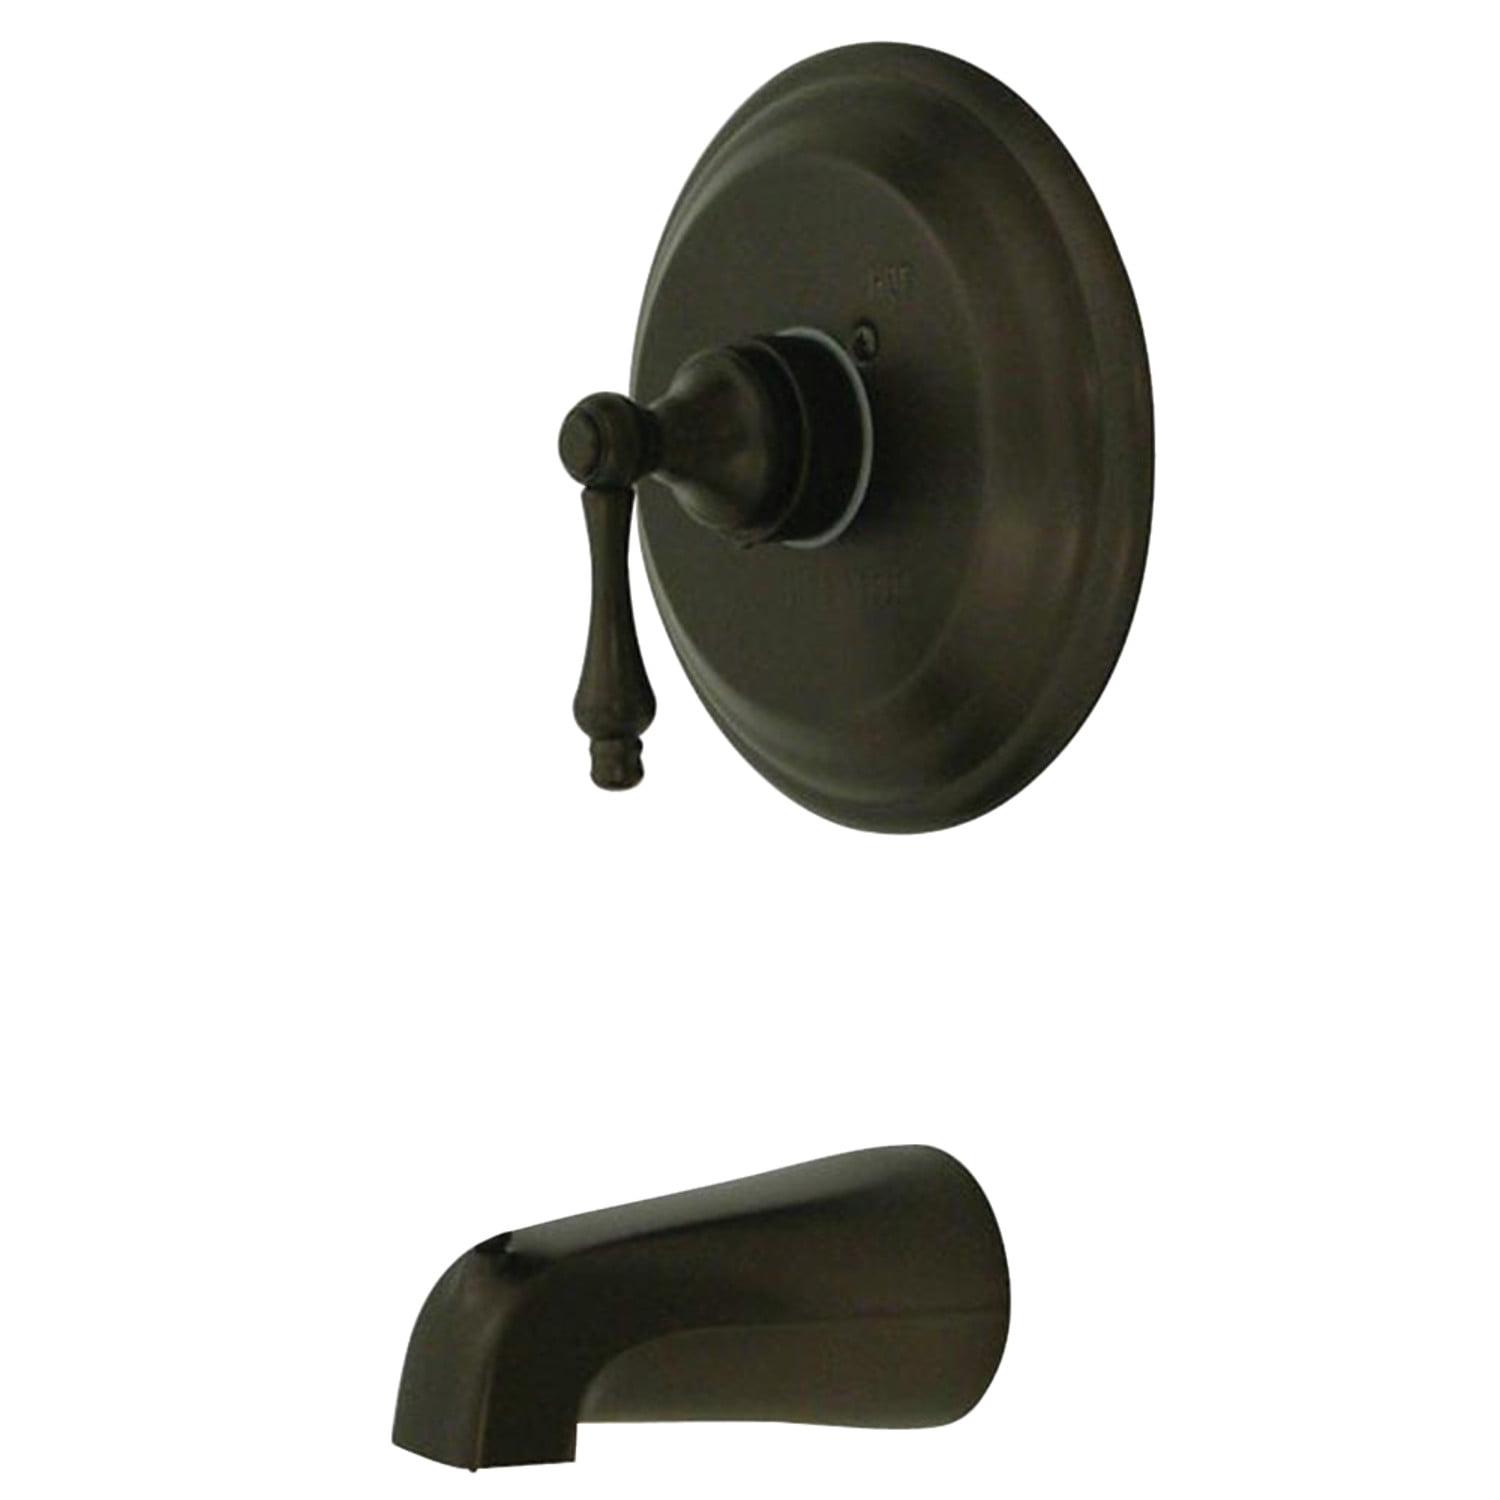 Early 20th Century Inspired Oil-Rubbed Bronze Tub Spout